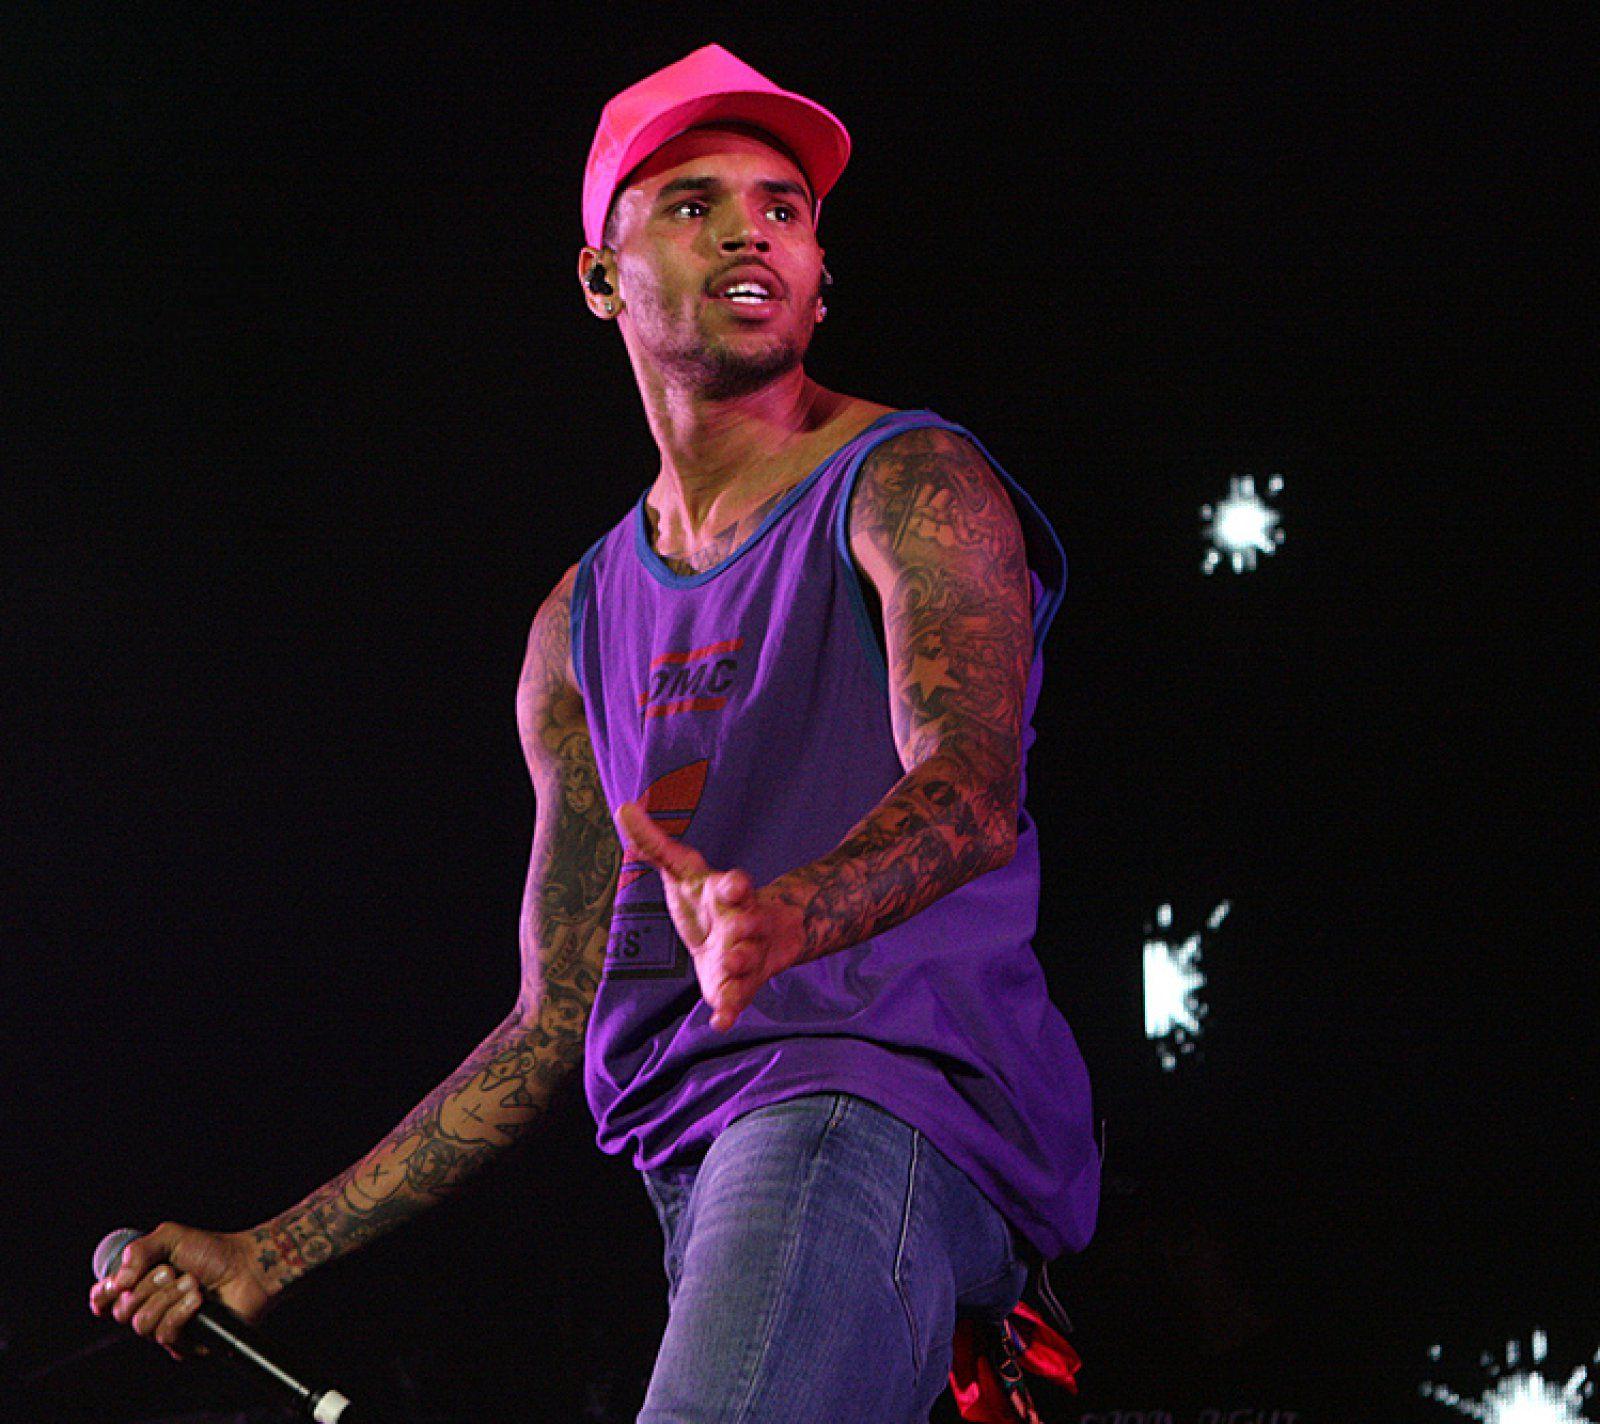 chris brown party free download